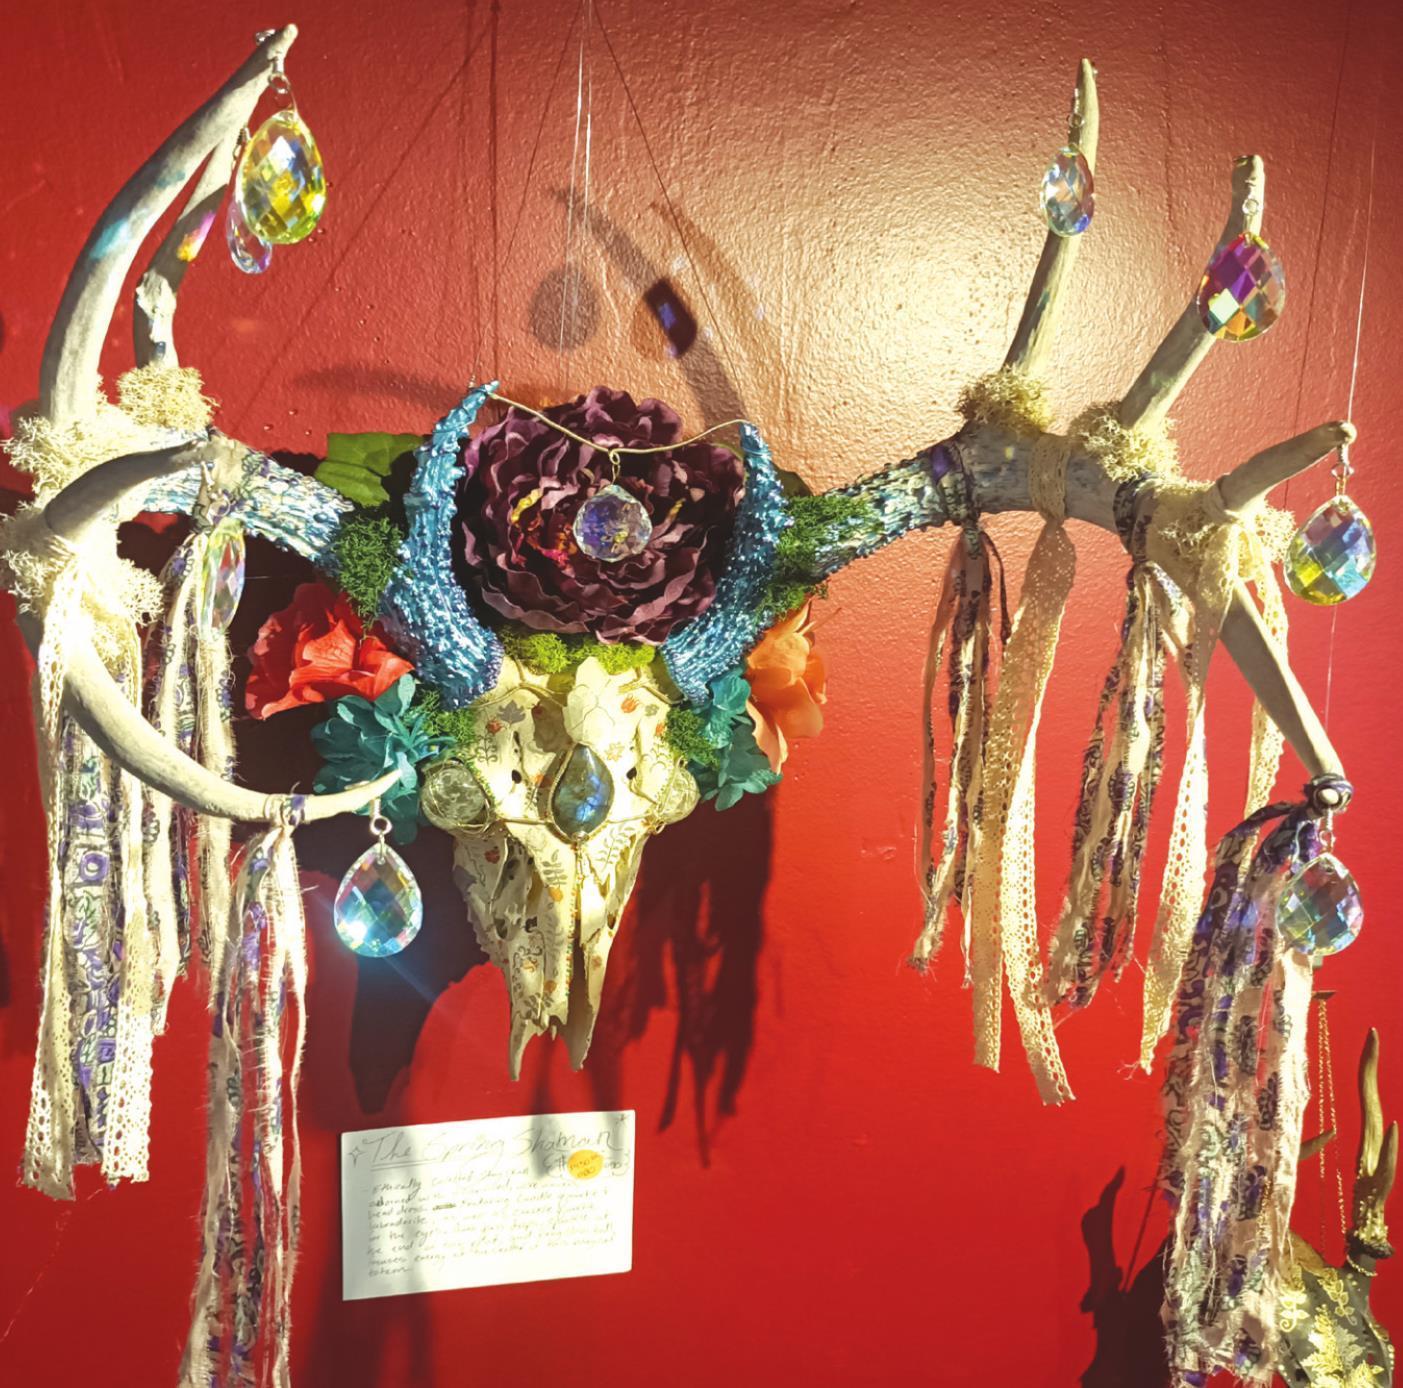 San Marcos artist embraces the beauty of broken things